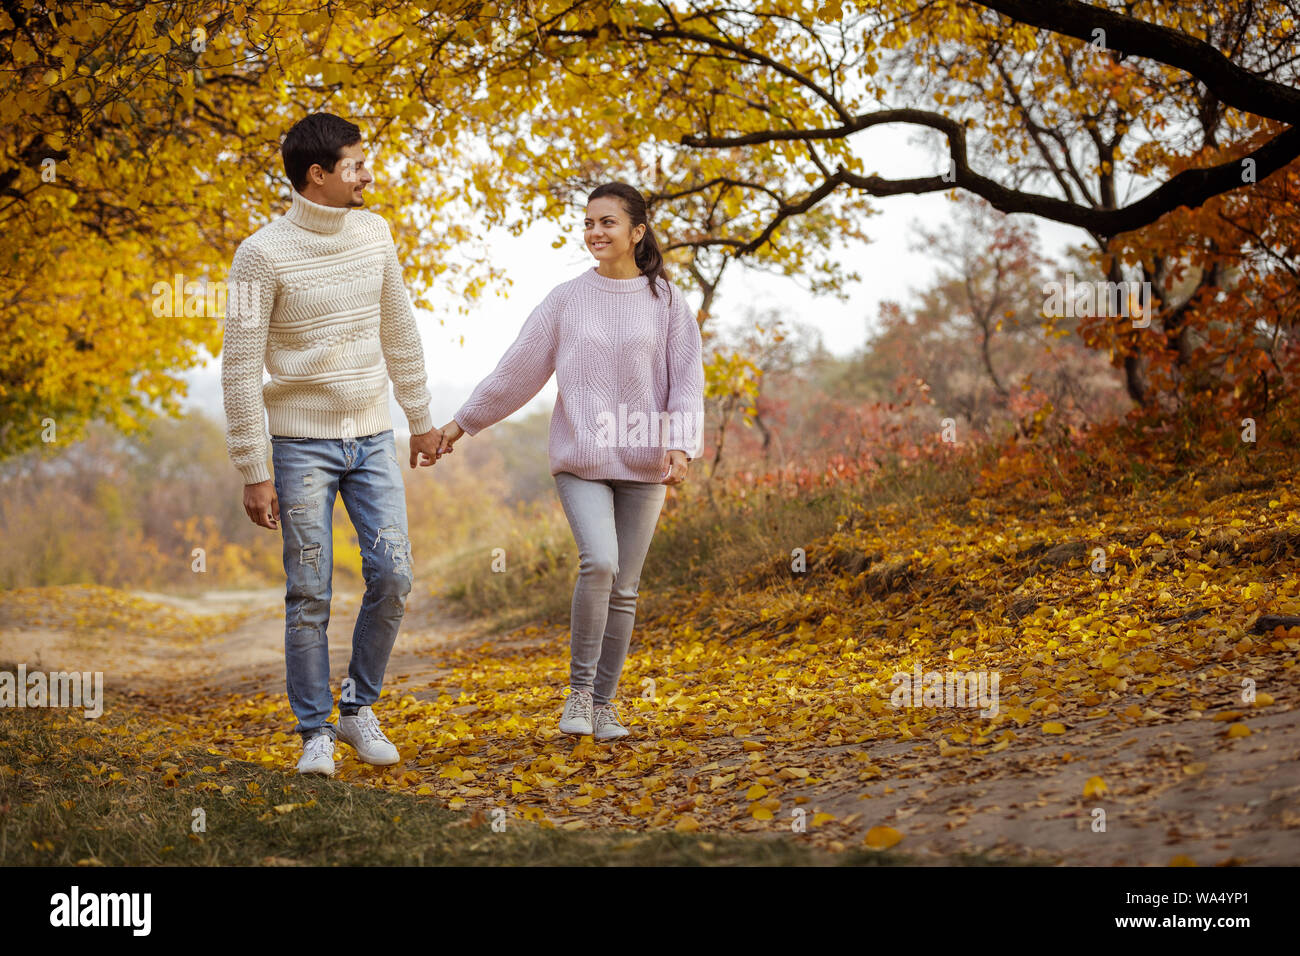 https://c8.alamy.com/comp/WA4YP1/couple-in-love-has-happy-moments-and-enjoying-beautiful-autumn-day-in-park-WA4YP1.jpg